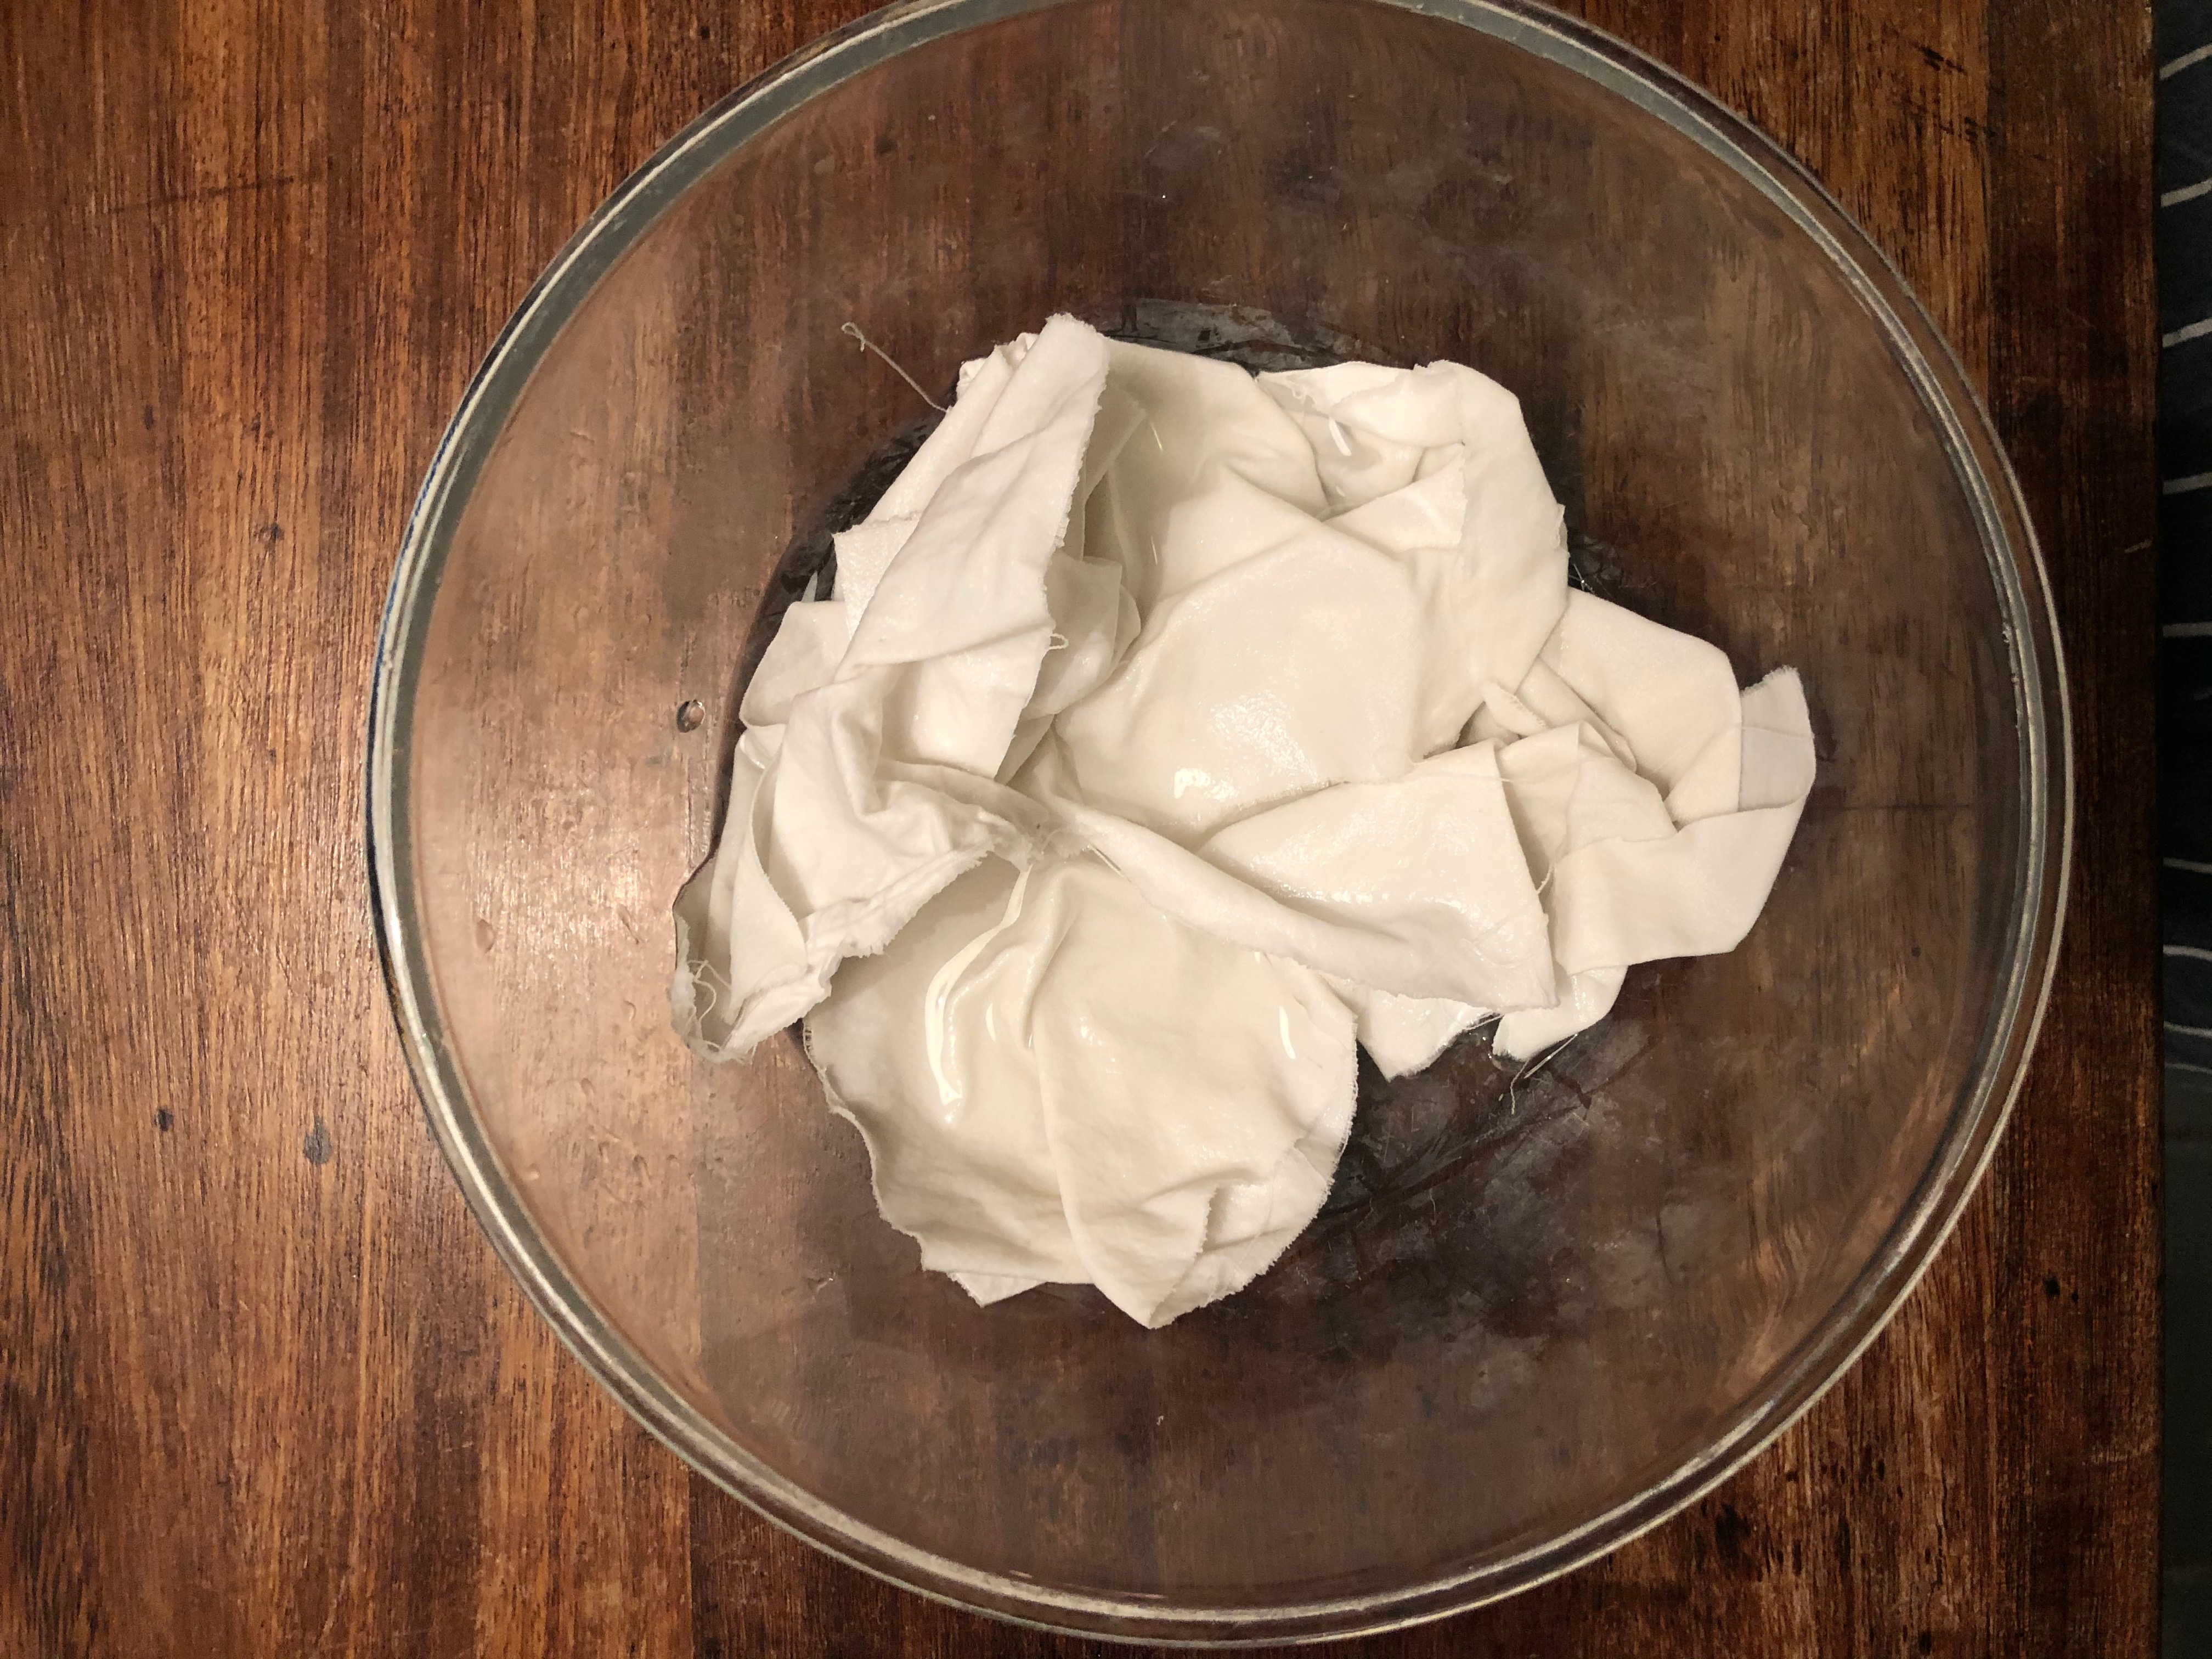 Cotton soaked in vinegar in a bowl